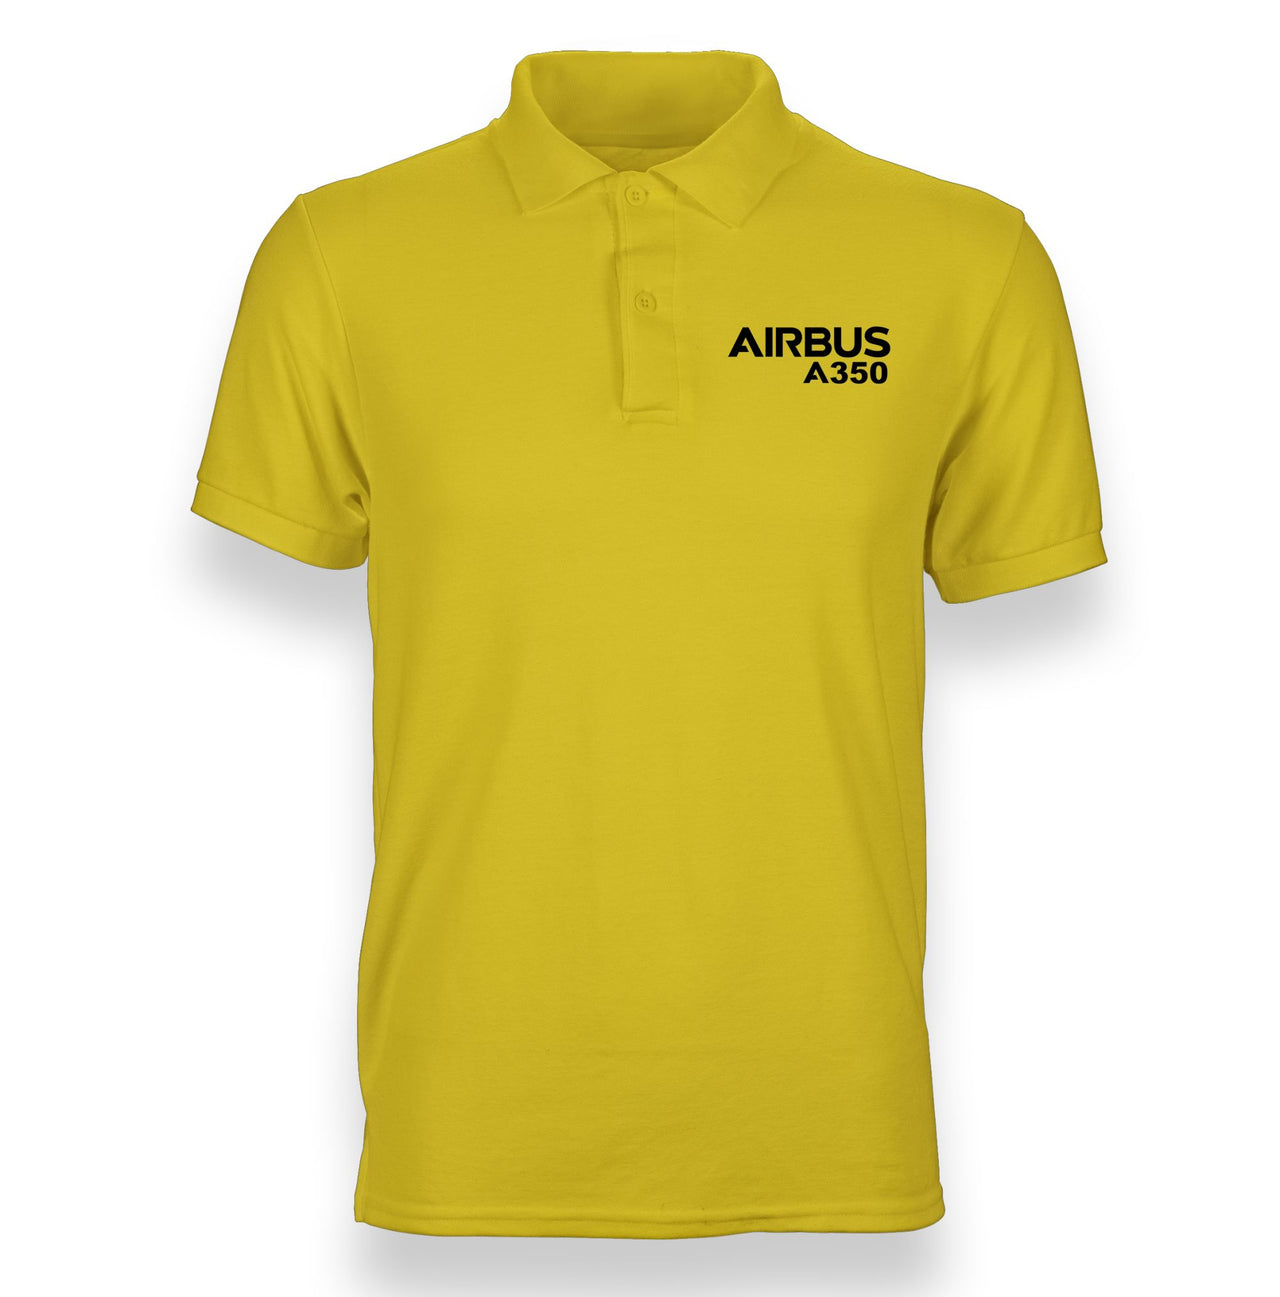 Airbus A350 & Text Designed "WOMEN" Polo T-Shirts